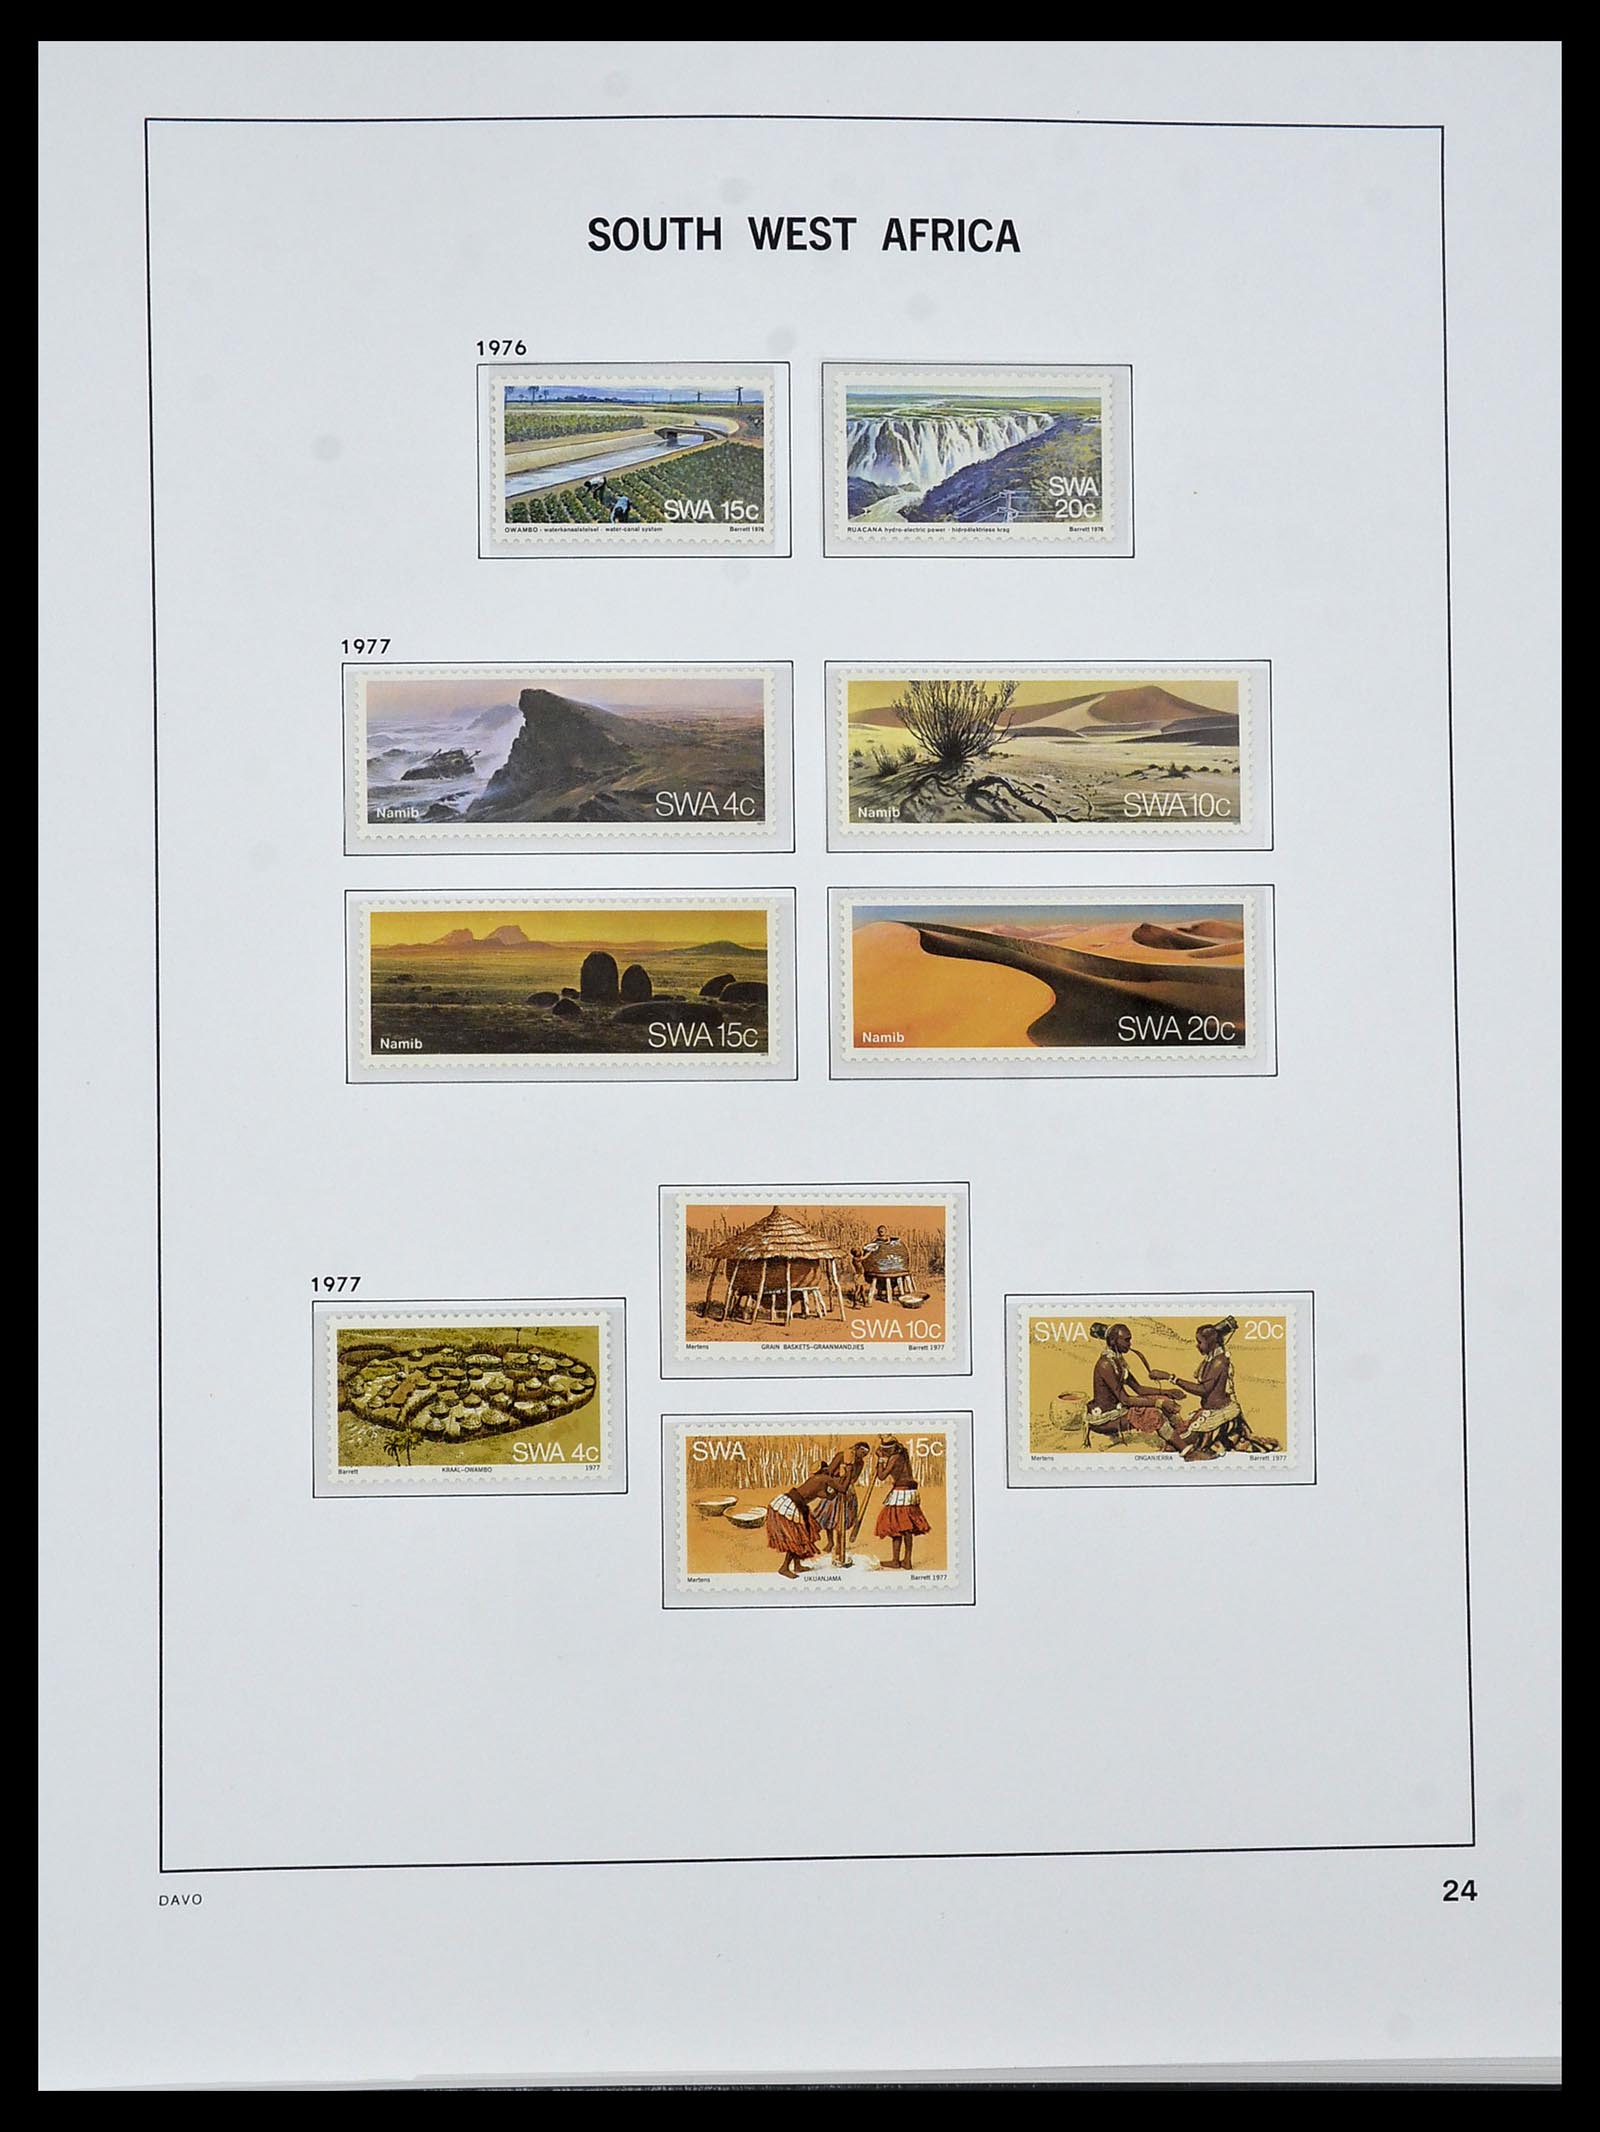 34291 020 - Stamp collection 34291 South West Africa/Namibia 1926-2017!